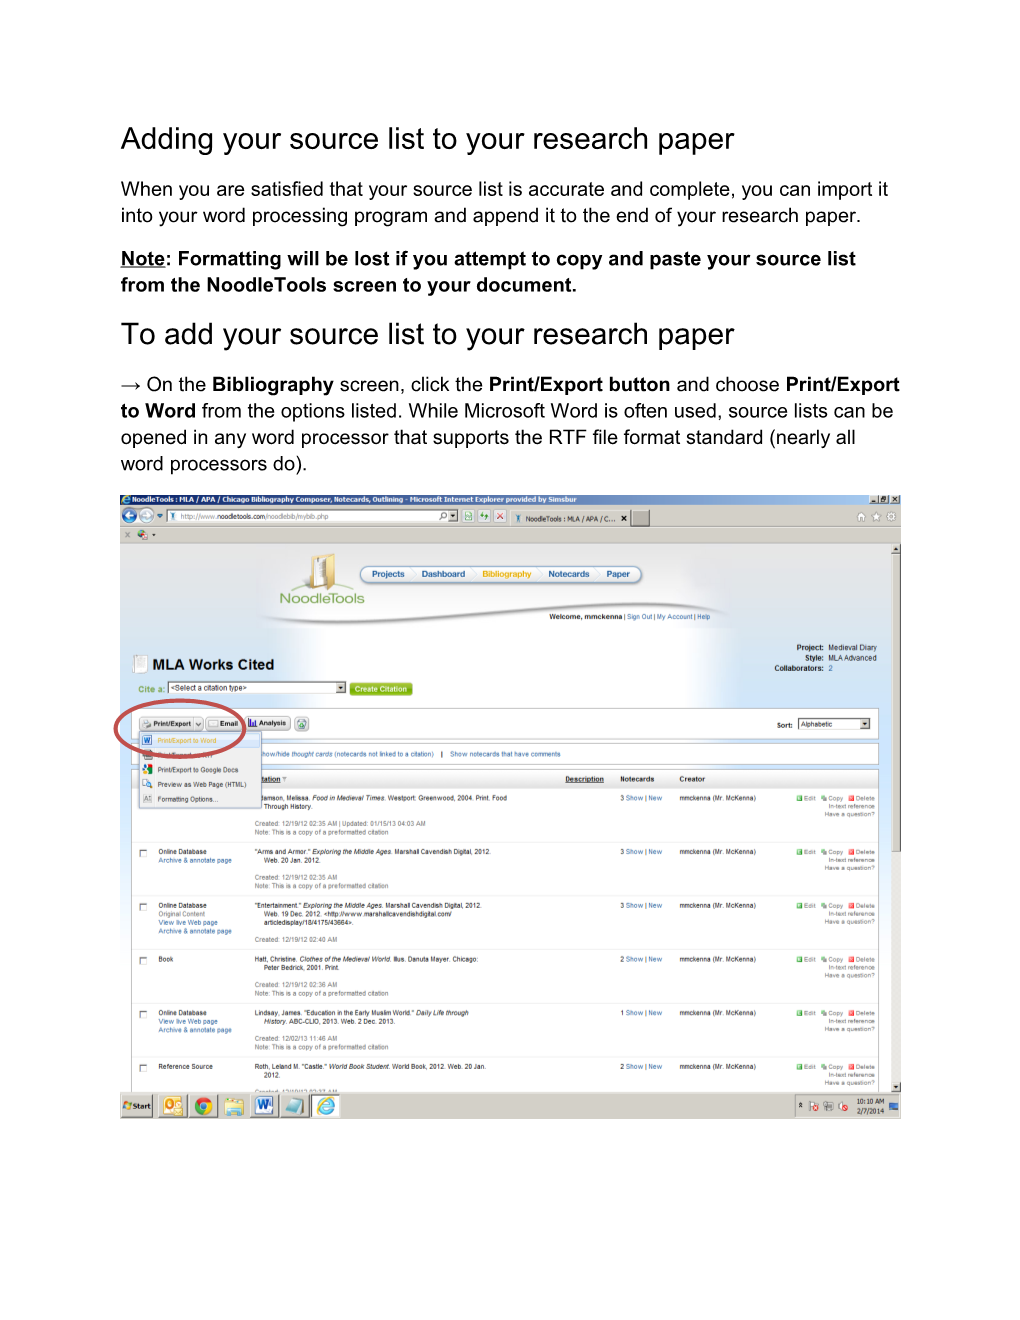 Adding Your Source List to Your Research Paper